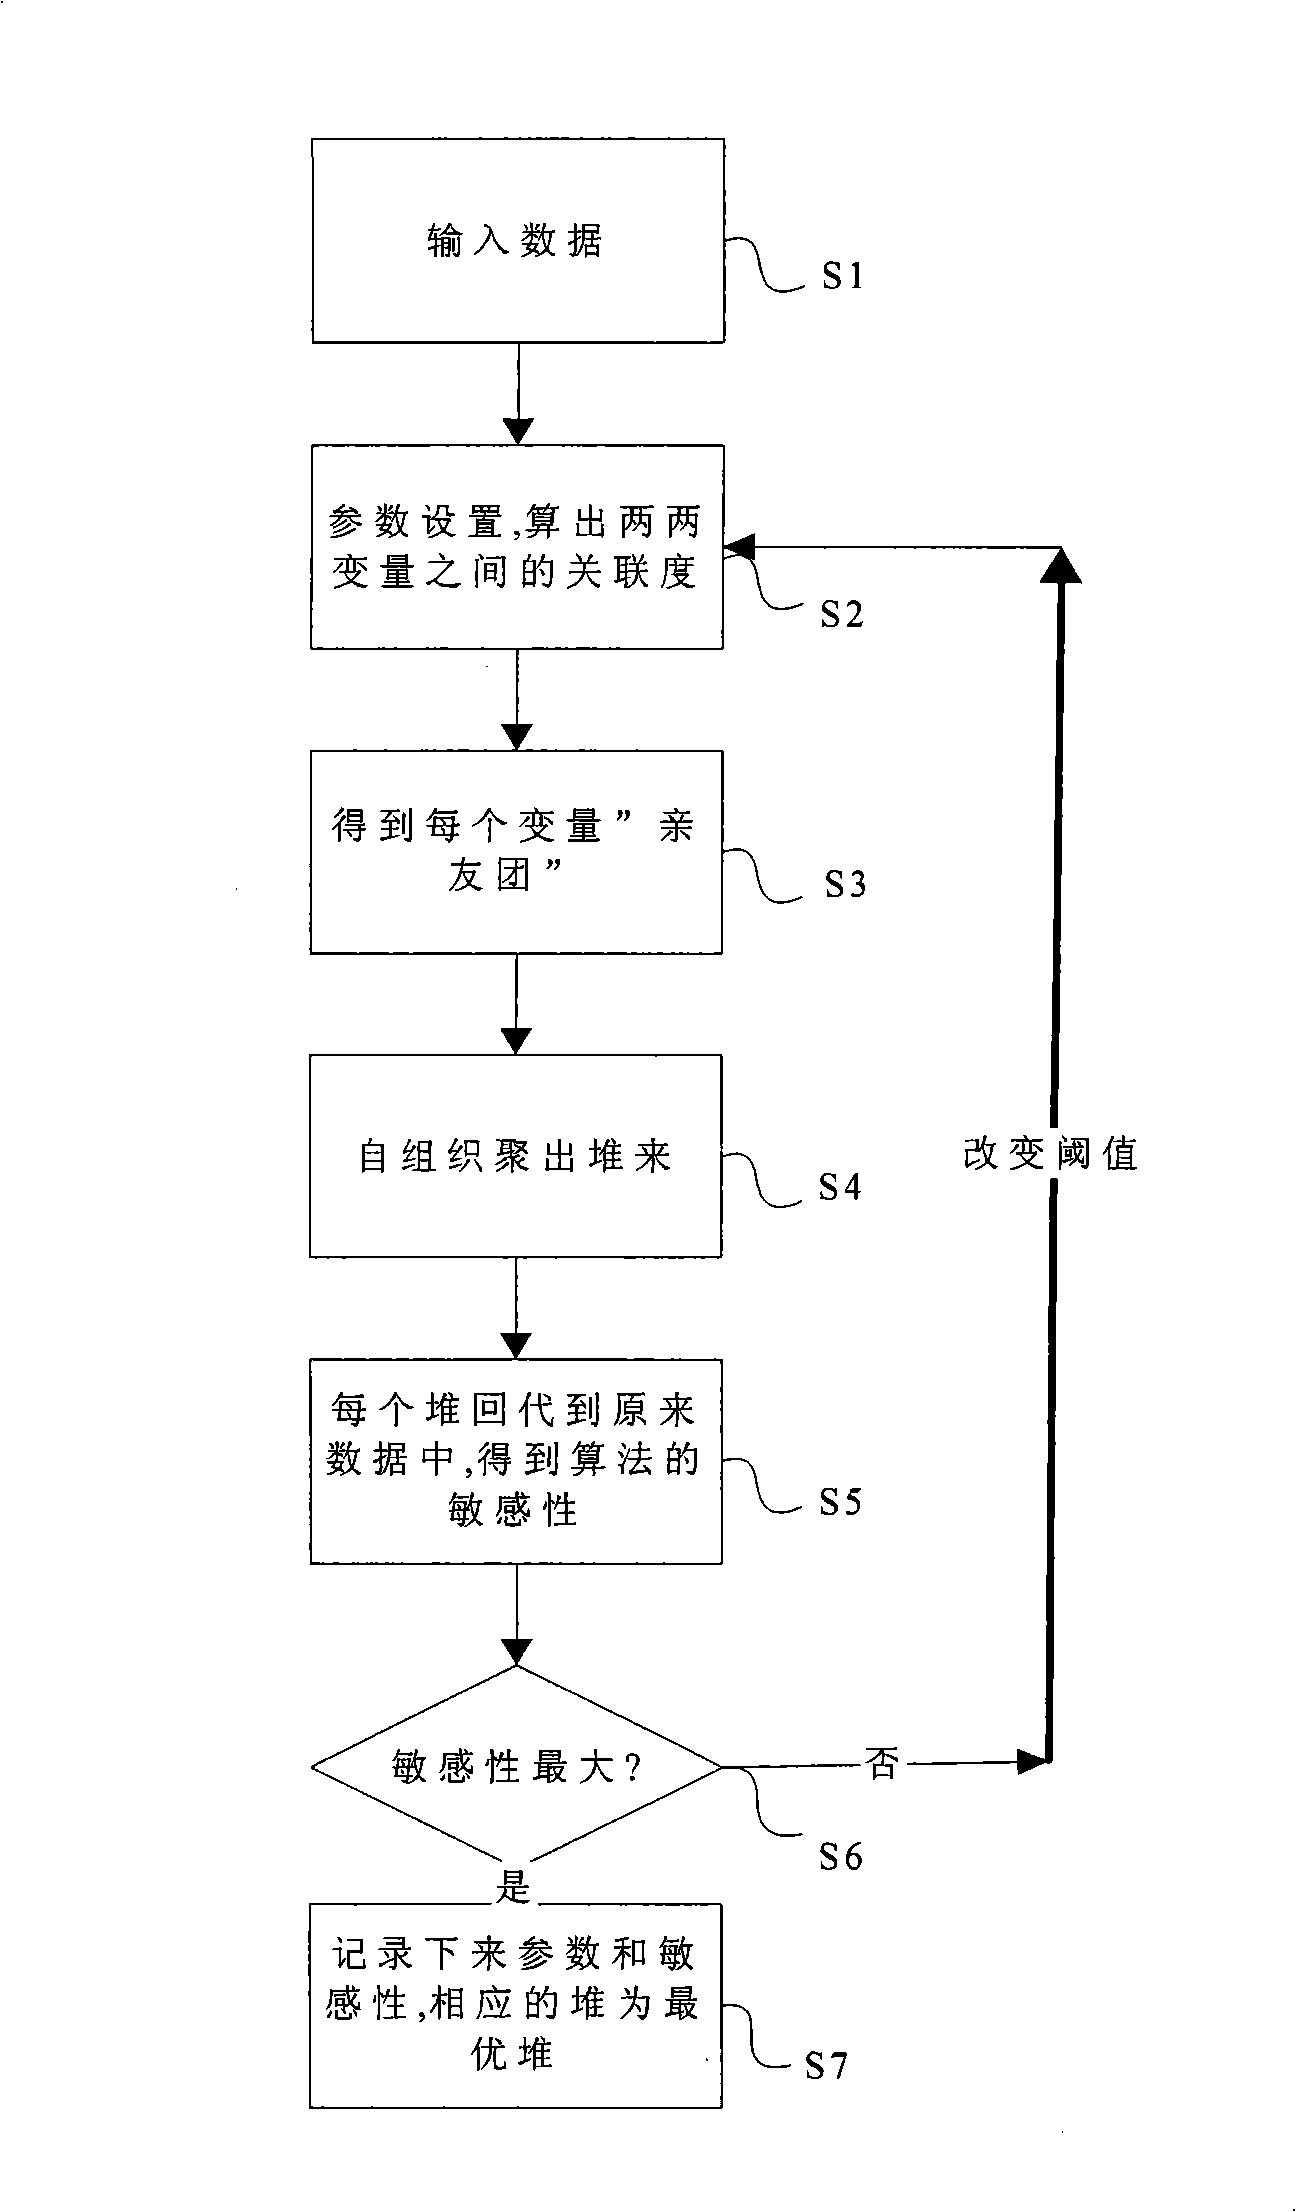 Non-supervision clustering method of complicated system